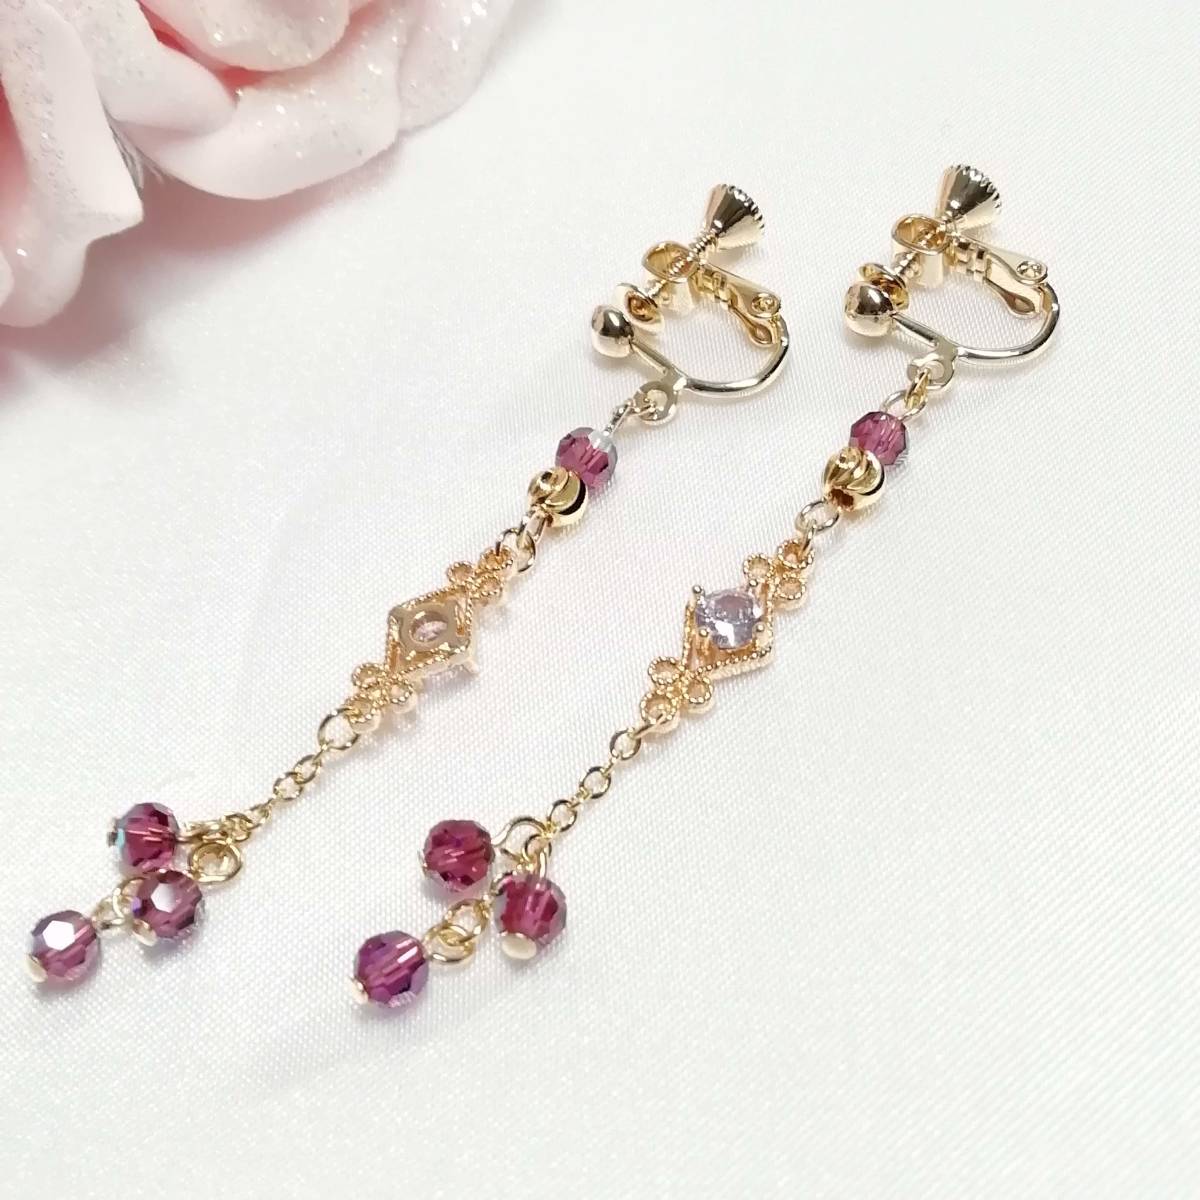 Handmade earrings with amethyst AB and cubic zirconia charms/Swarovski/elegant/purple/gold/light purple/cubic zirconia, Women's Accessories, Earrings, beads, Glass